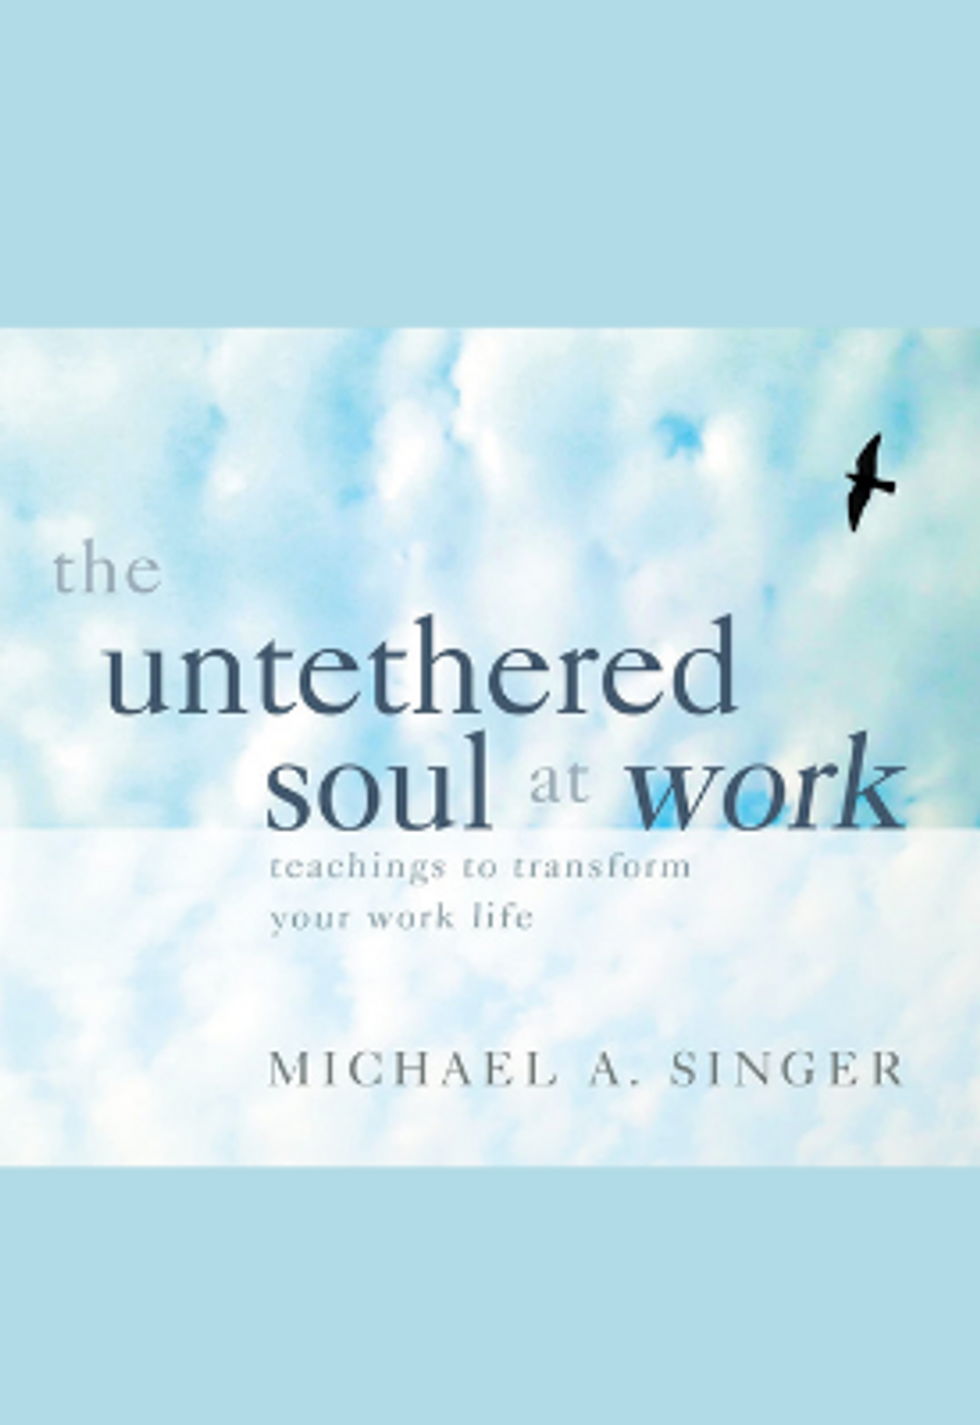 The front cover of the book "The Untethered Soul at Work: Teachings to Transform Your Work Life" by Michael A. Singer